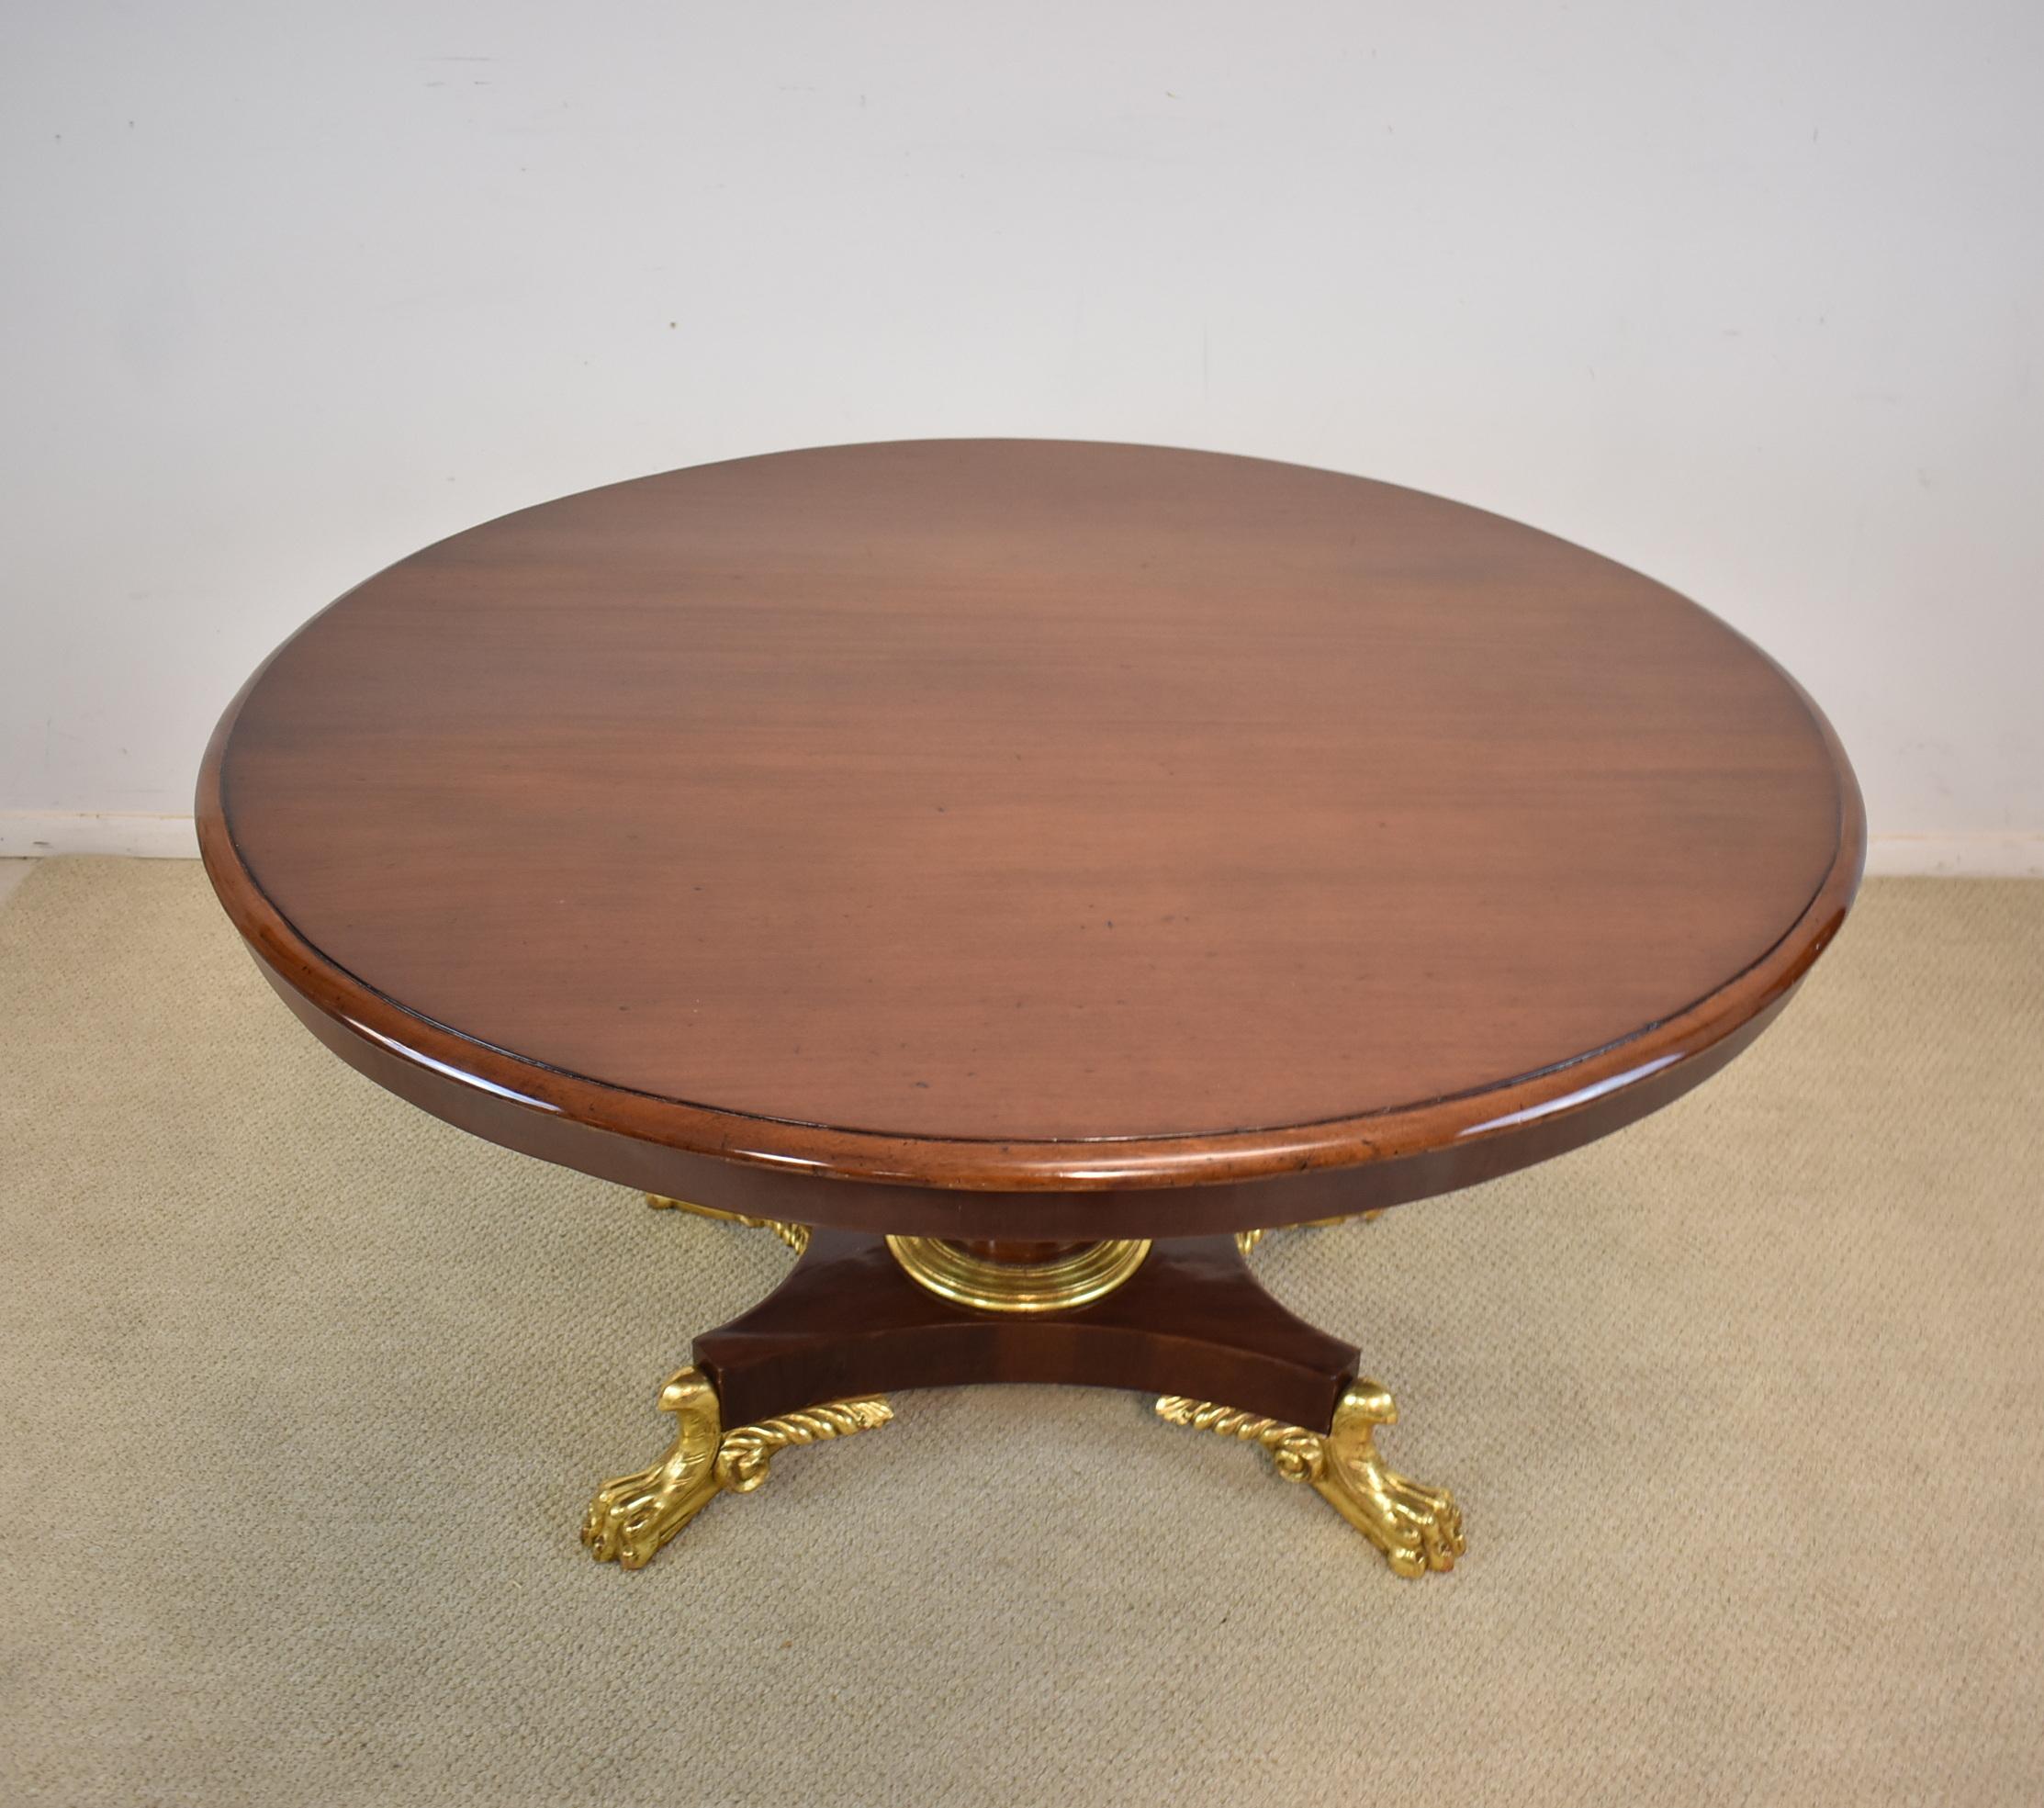 A stunning round center table from the late 1800s. This beautiful mahogany table features a high glossy finish and a pedestal base with gold gilt paw feet. The top is removable. The dimensions are 28.5